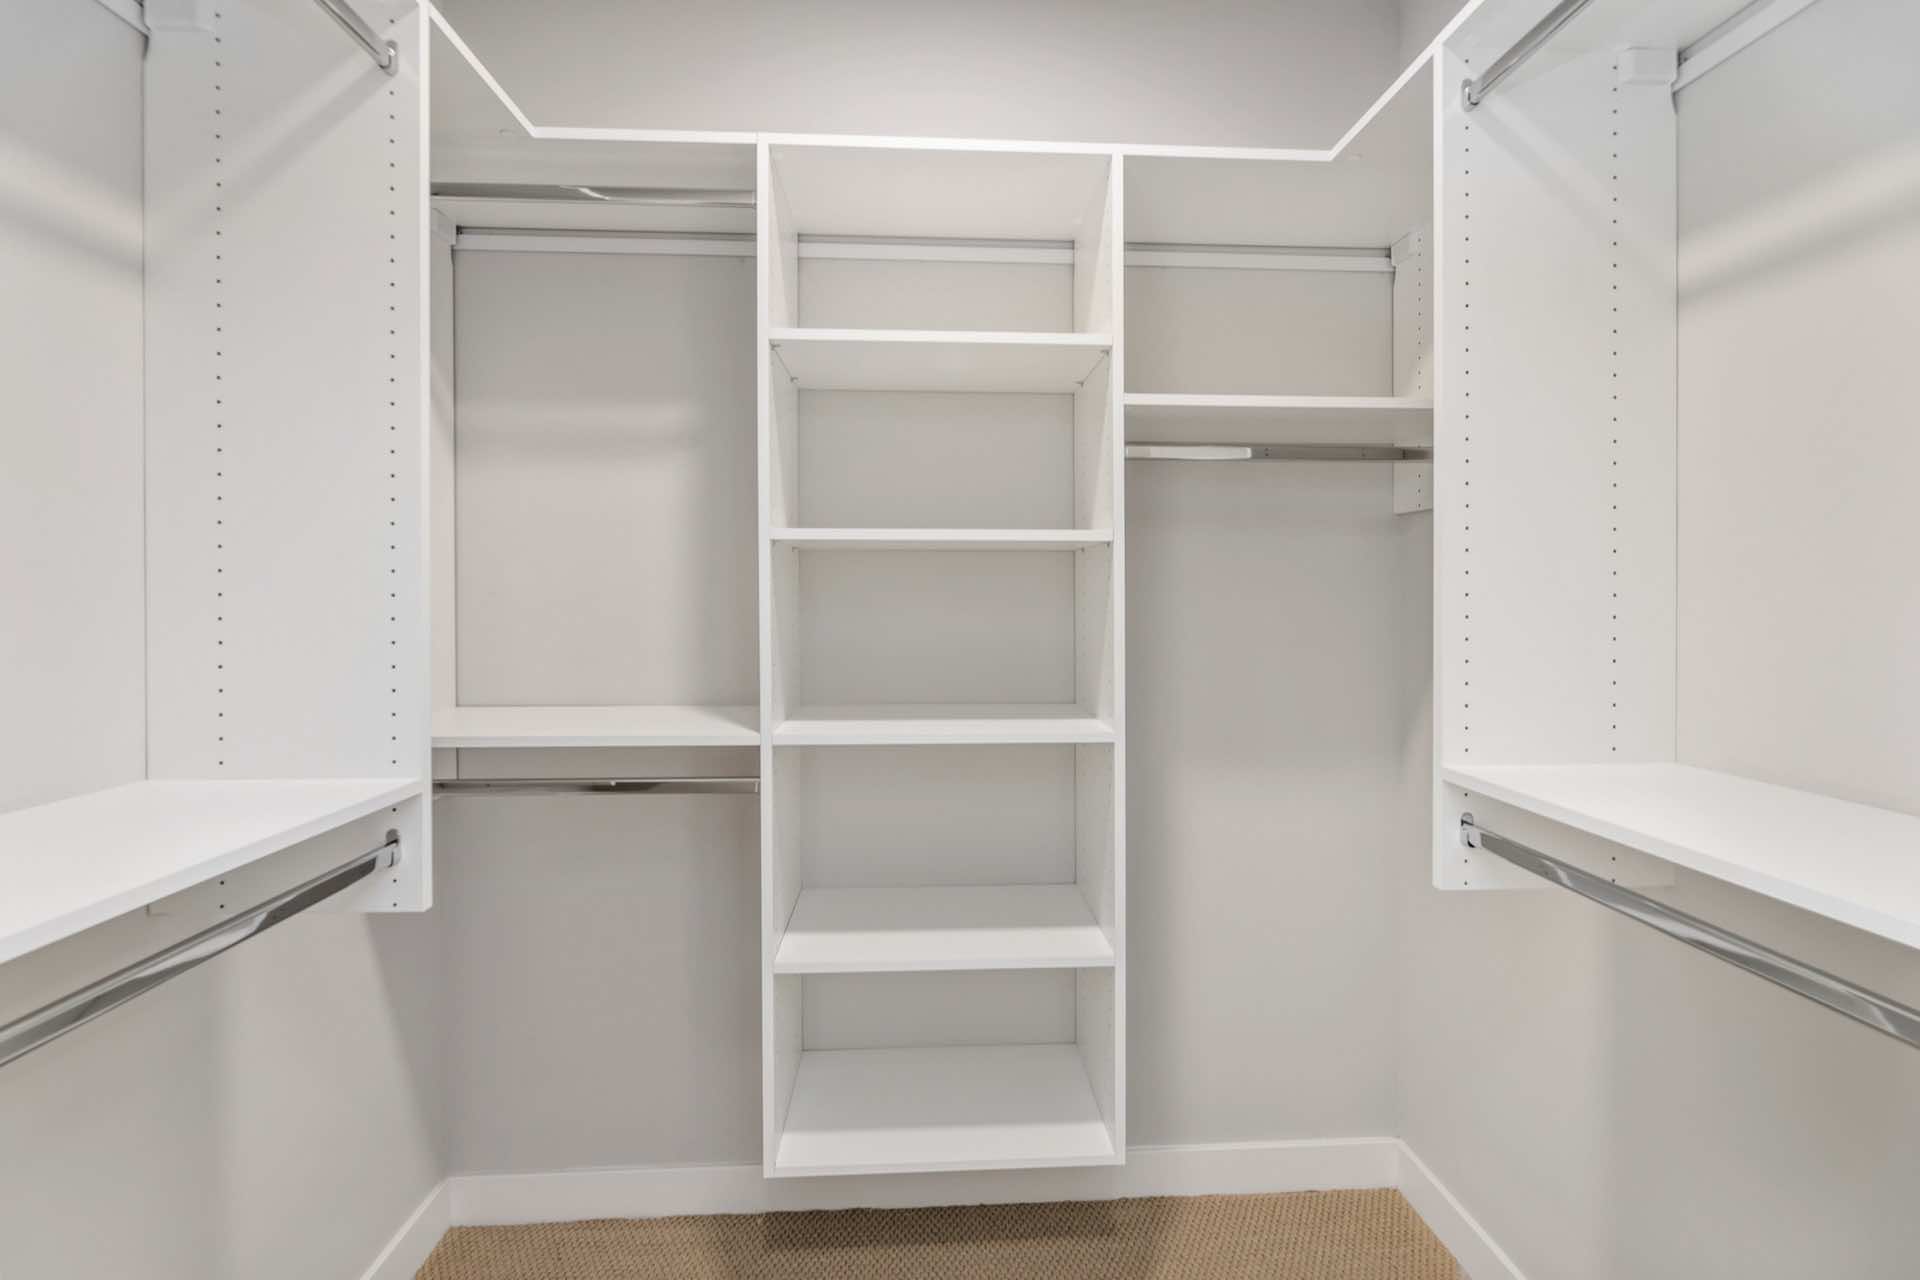 Walk-in closet with built-in shelves